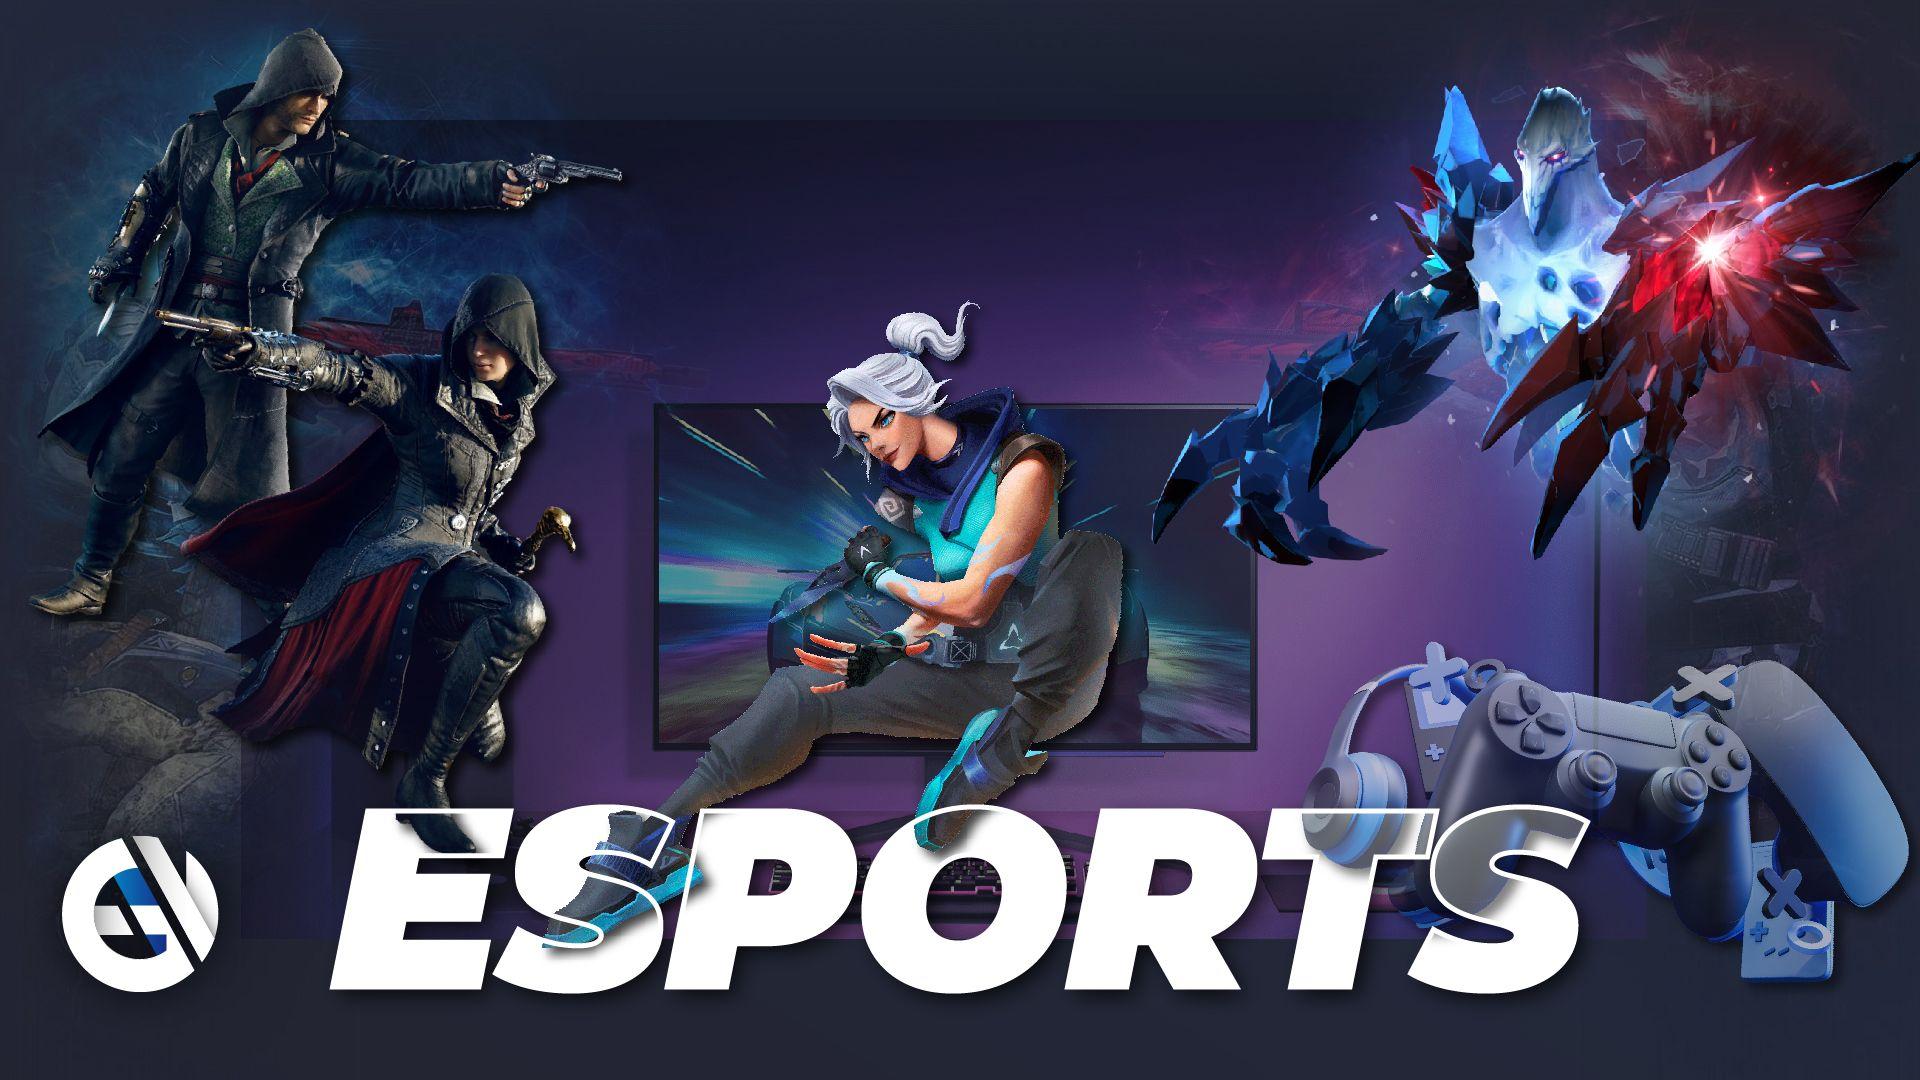 These are the parallels between e-sports and traditional sports